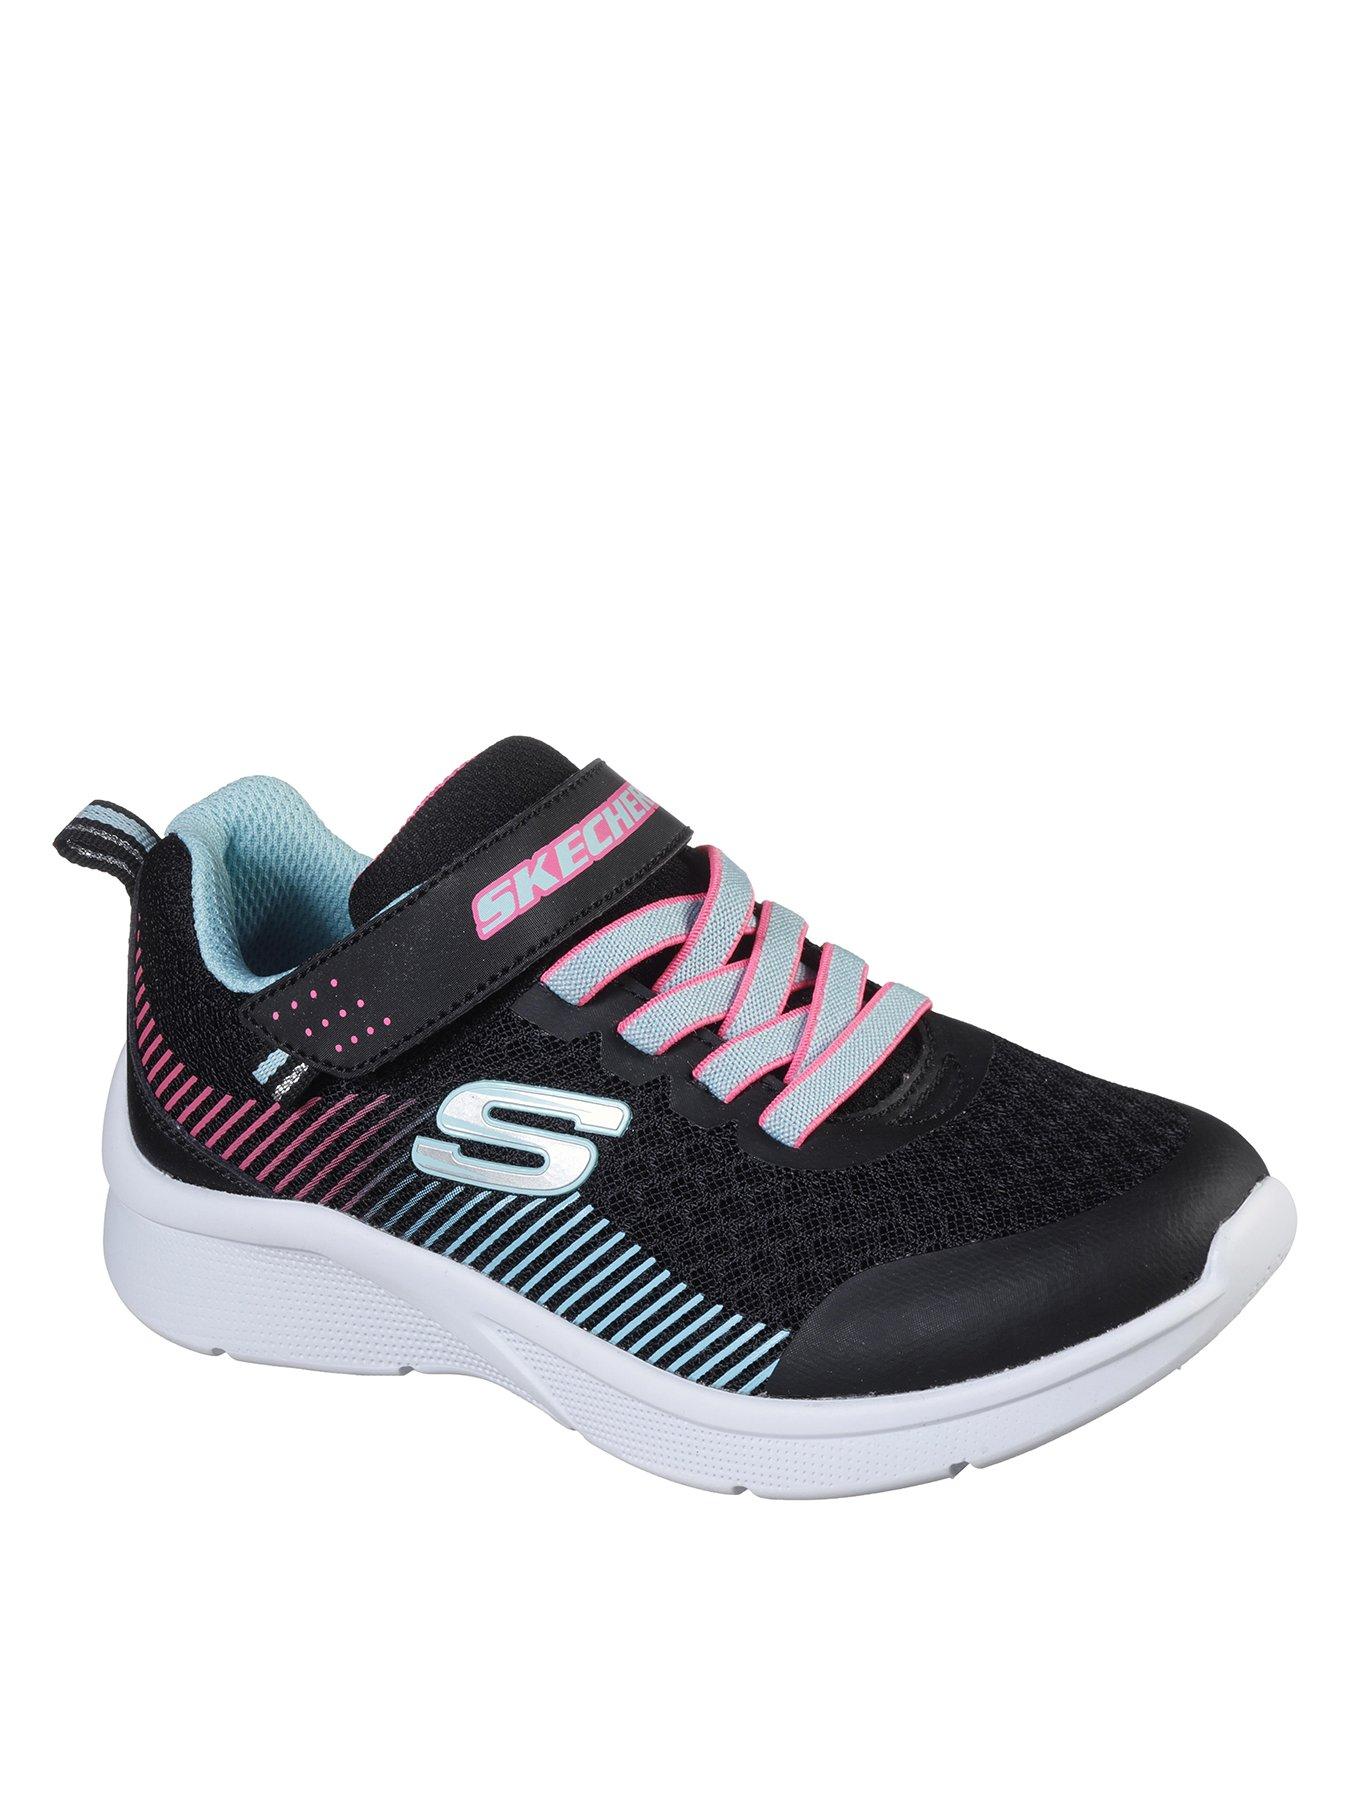 skechers shoes uk offers